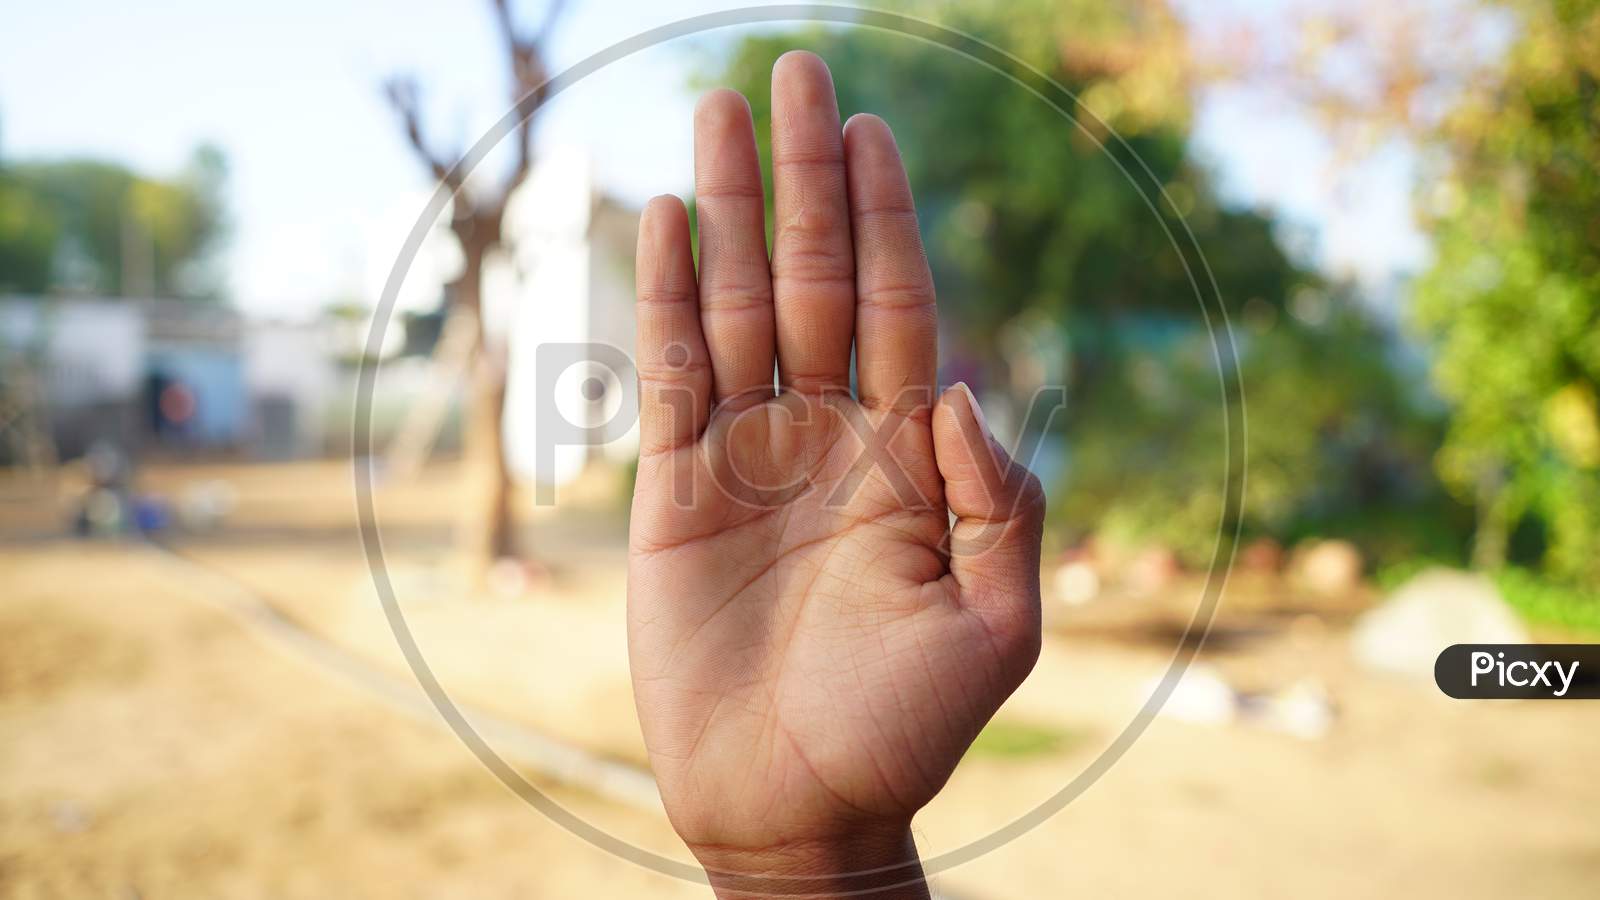 Hand Gesture In Blessing Closeup. Hand Action To Give Bless And Giving Auspicious Wishes For Future.